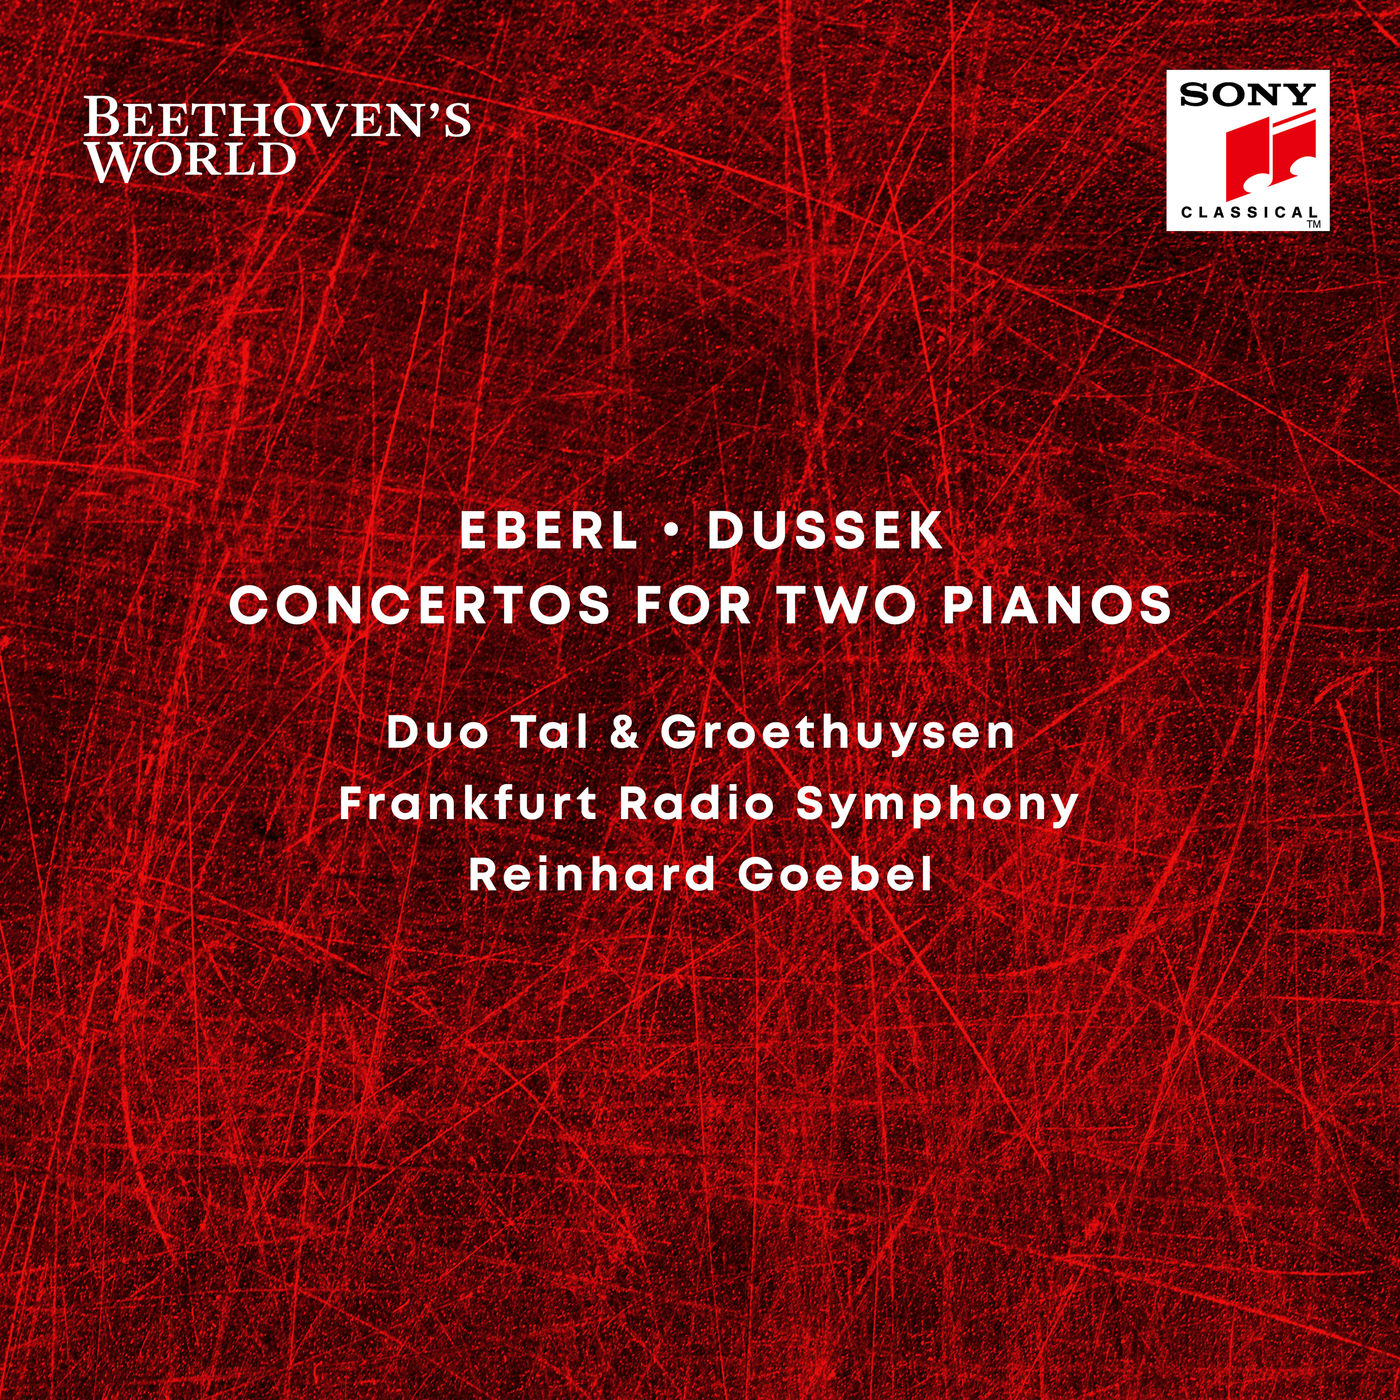 Tal & Groethuysen - Beethoven’s World - Eberl, Dussek Concertos for 2 Pianos (2020) [FLAC 24bit/48kHz]